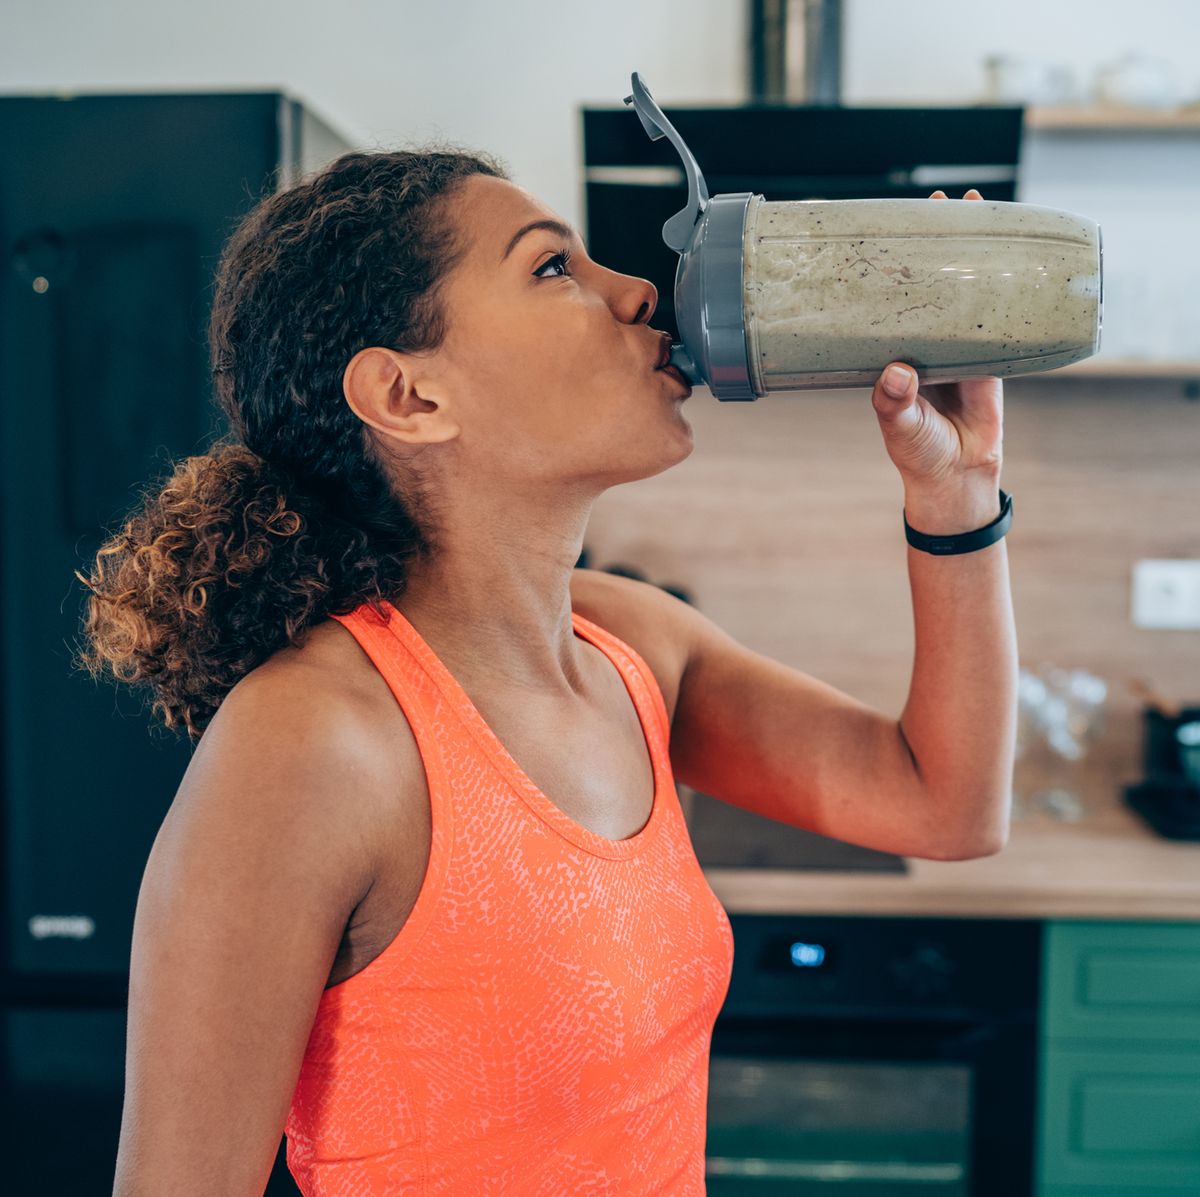 The Top Lactose-Free Protein Powders for Female Weight Loss